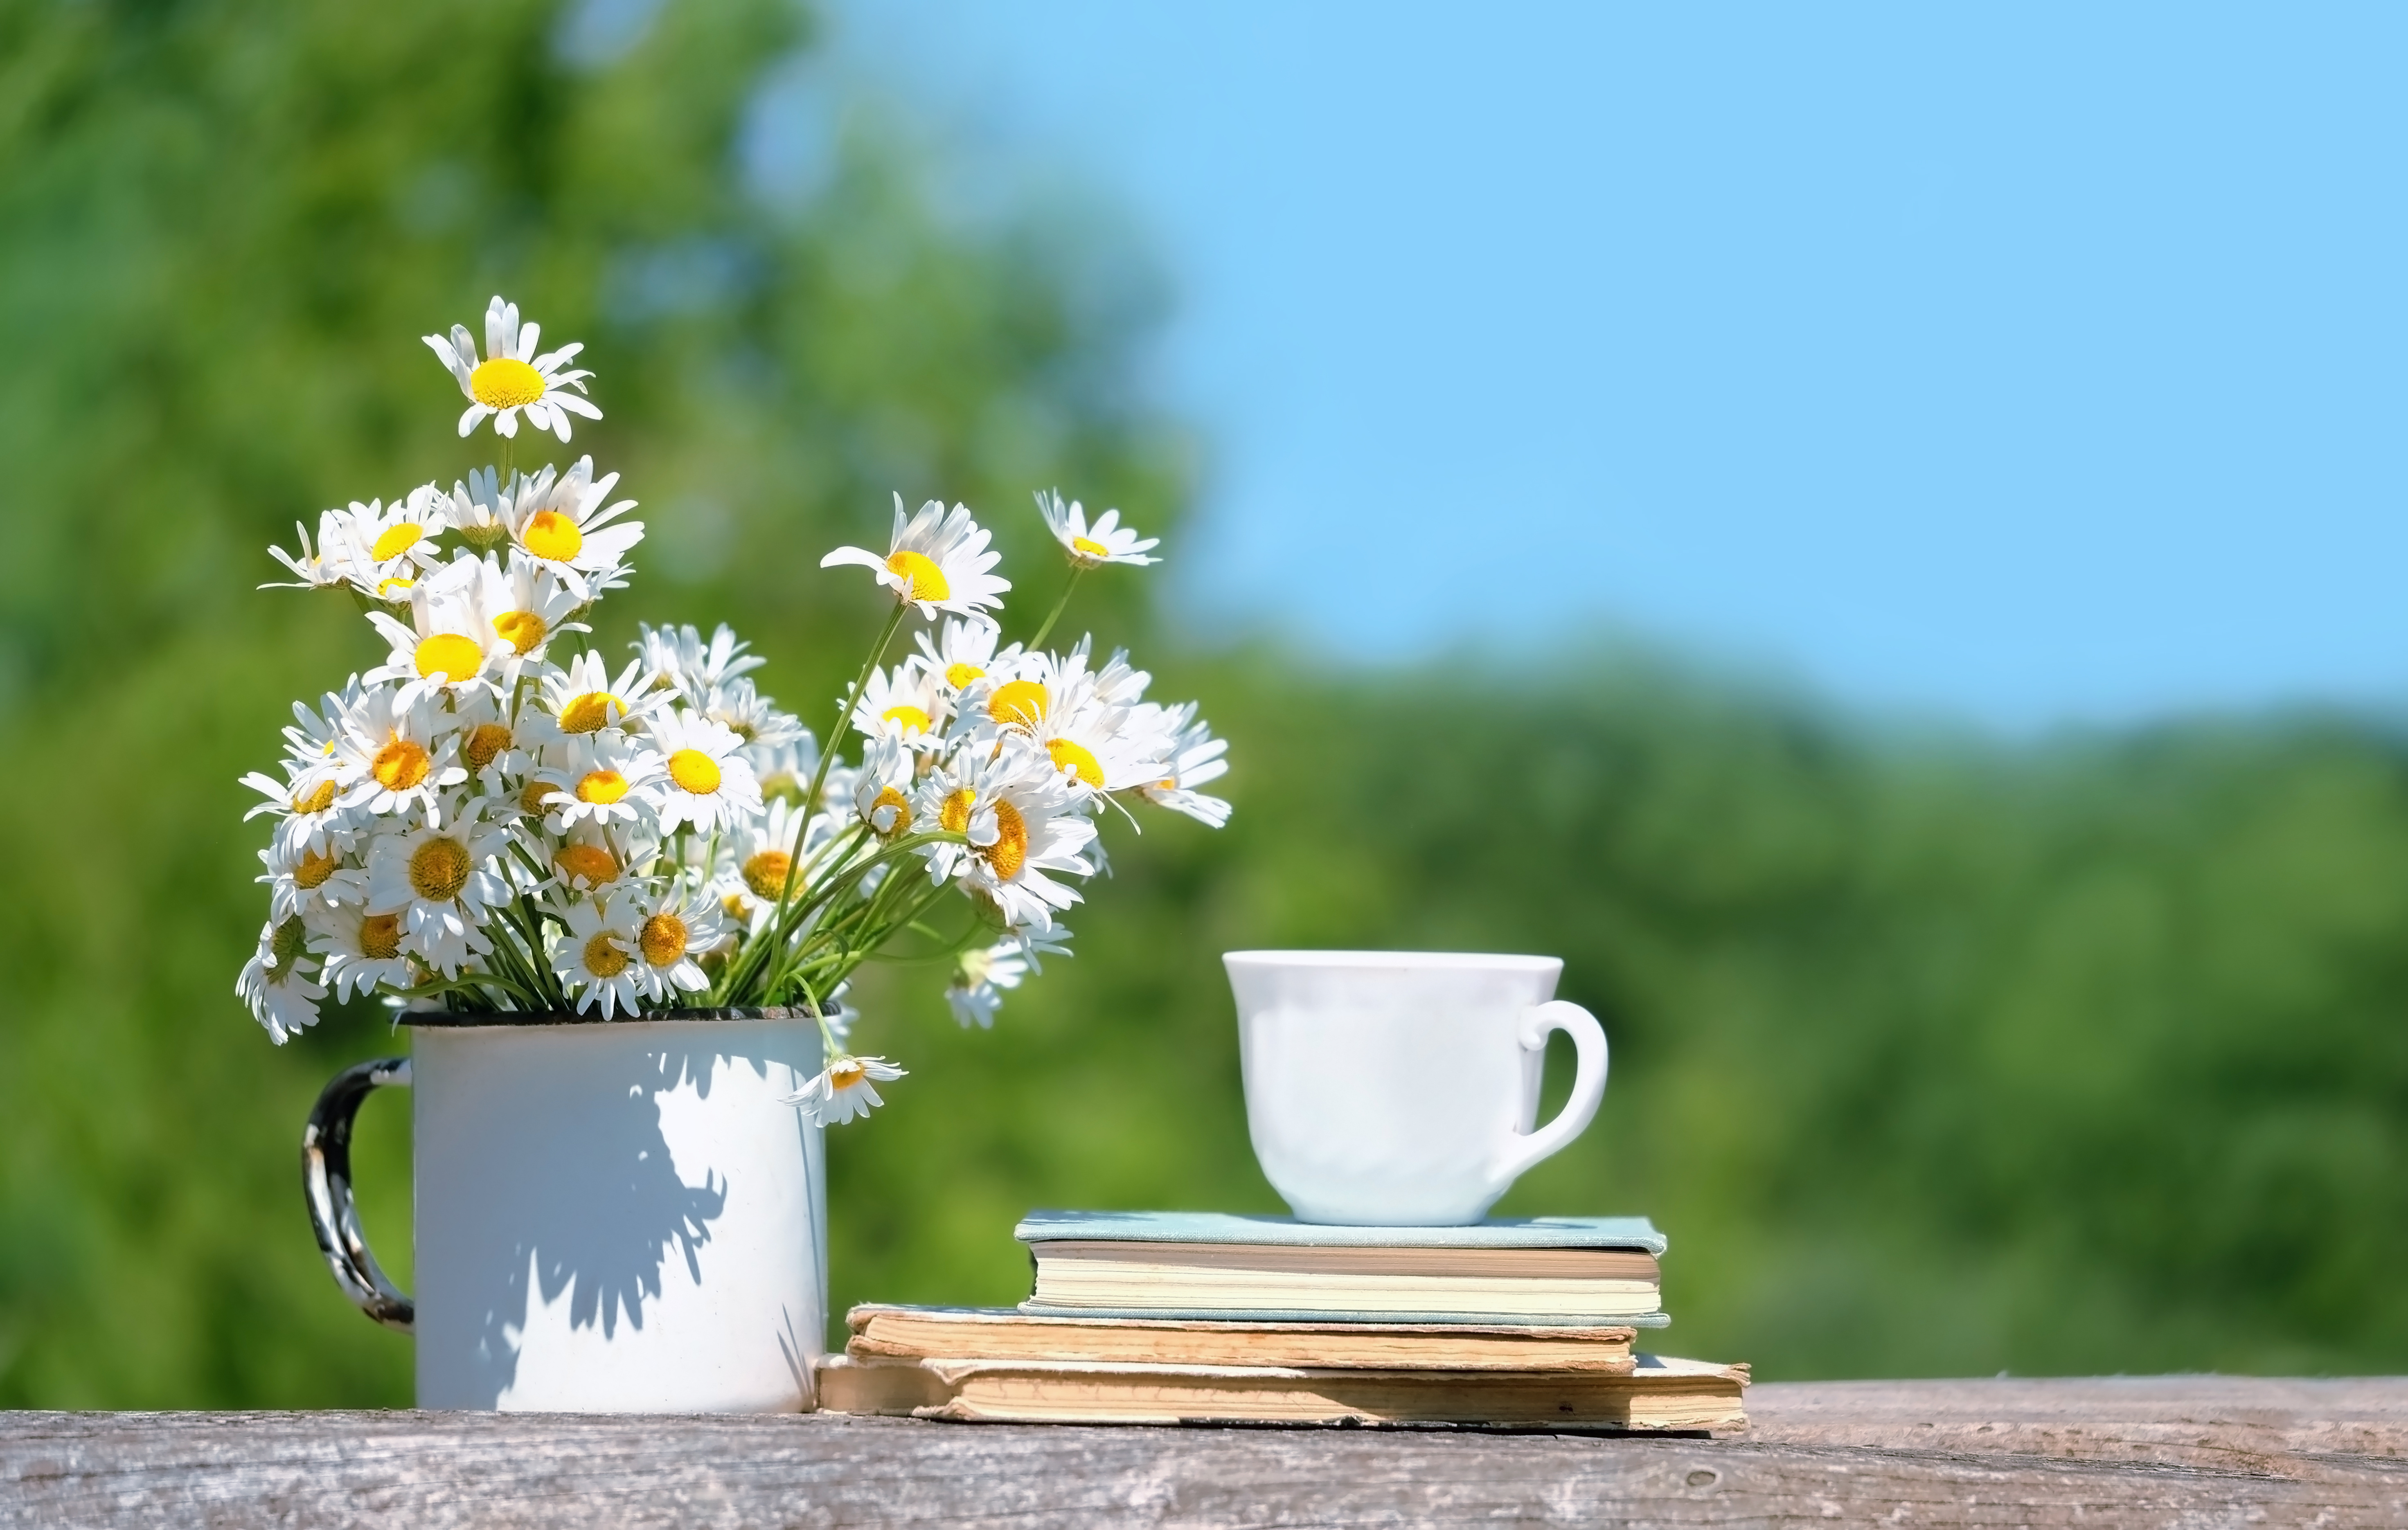 Tea cup, bouquet of daisies and book on table in garden.